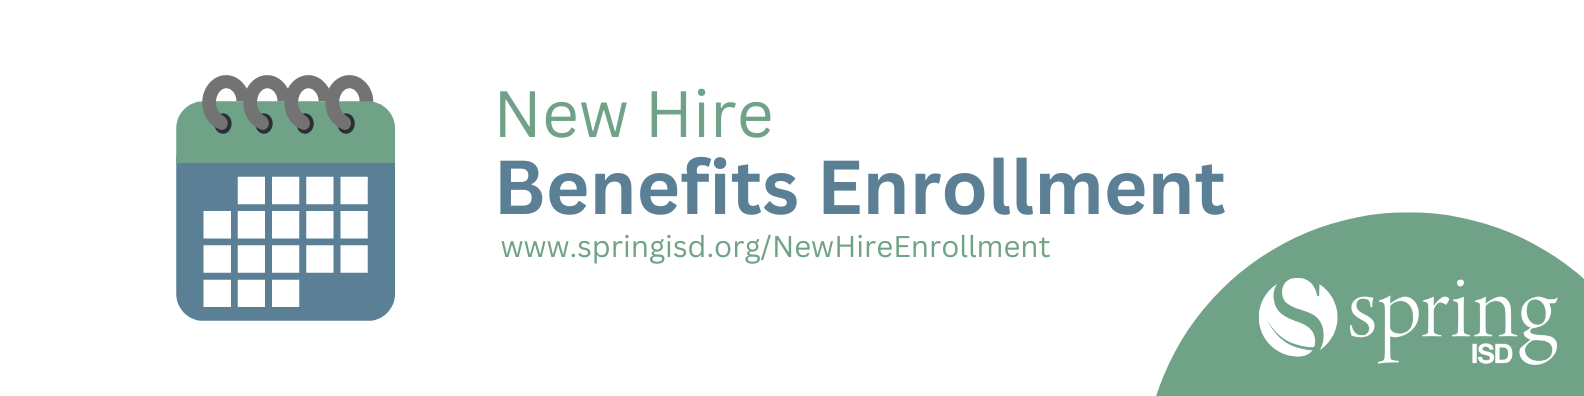 new hire benefits enrollmwnt from spring ISD banner